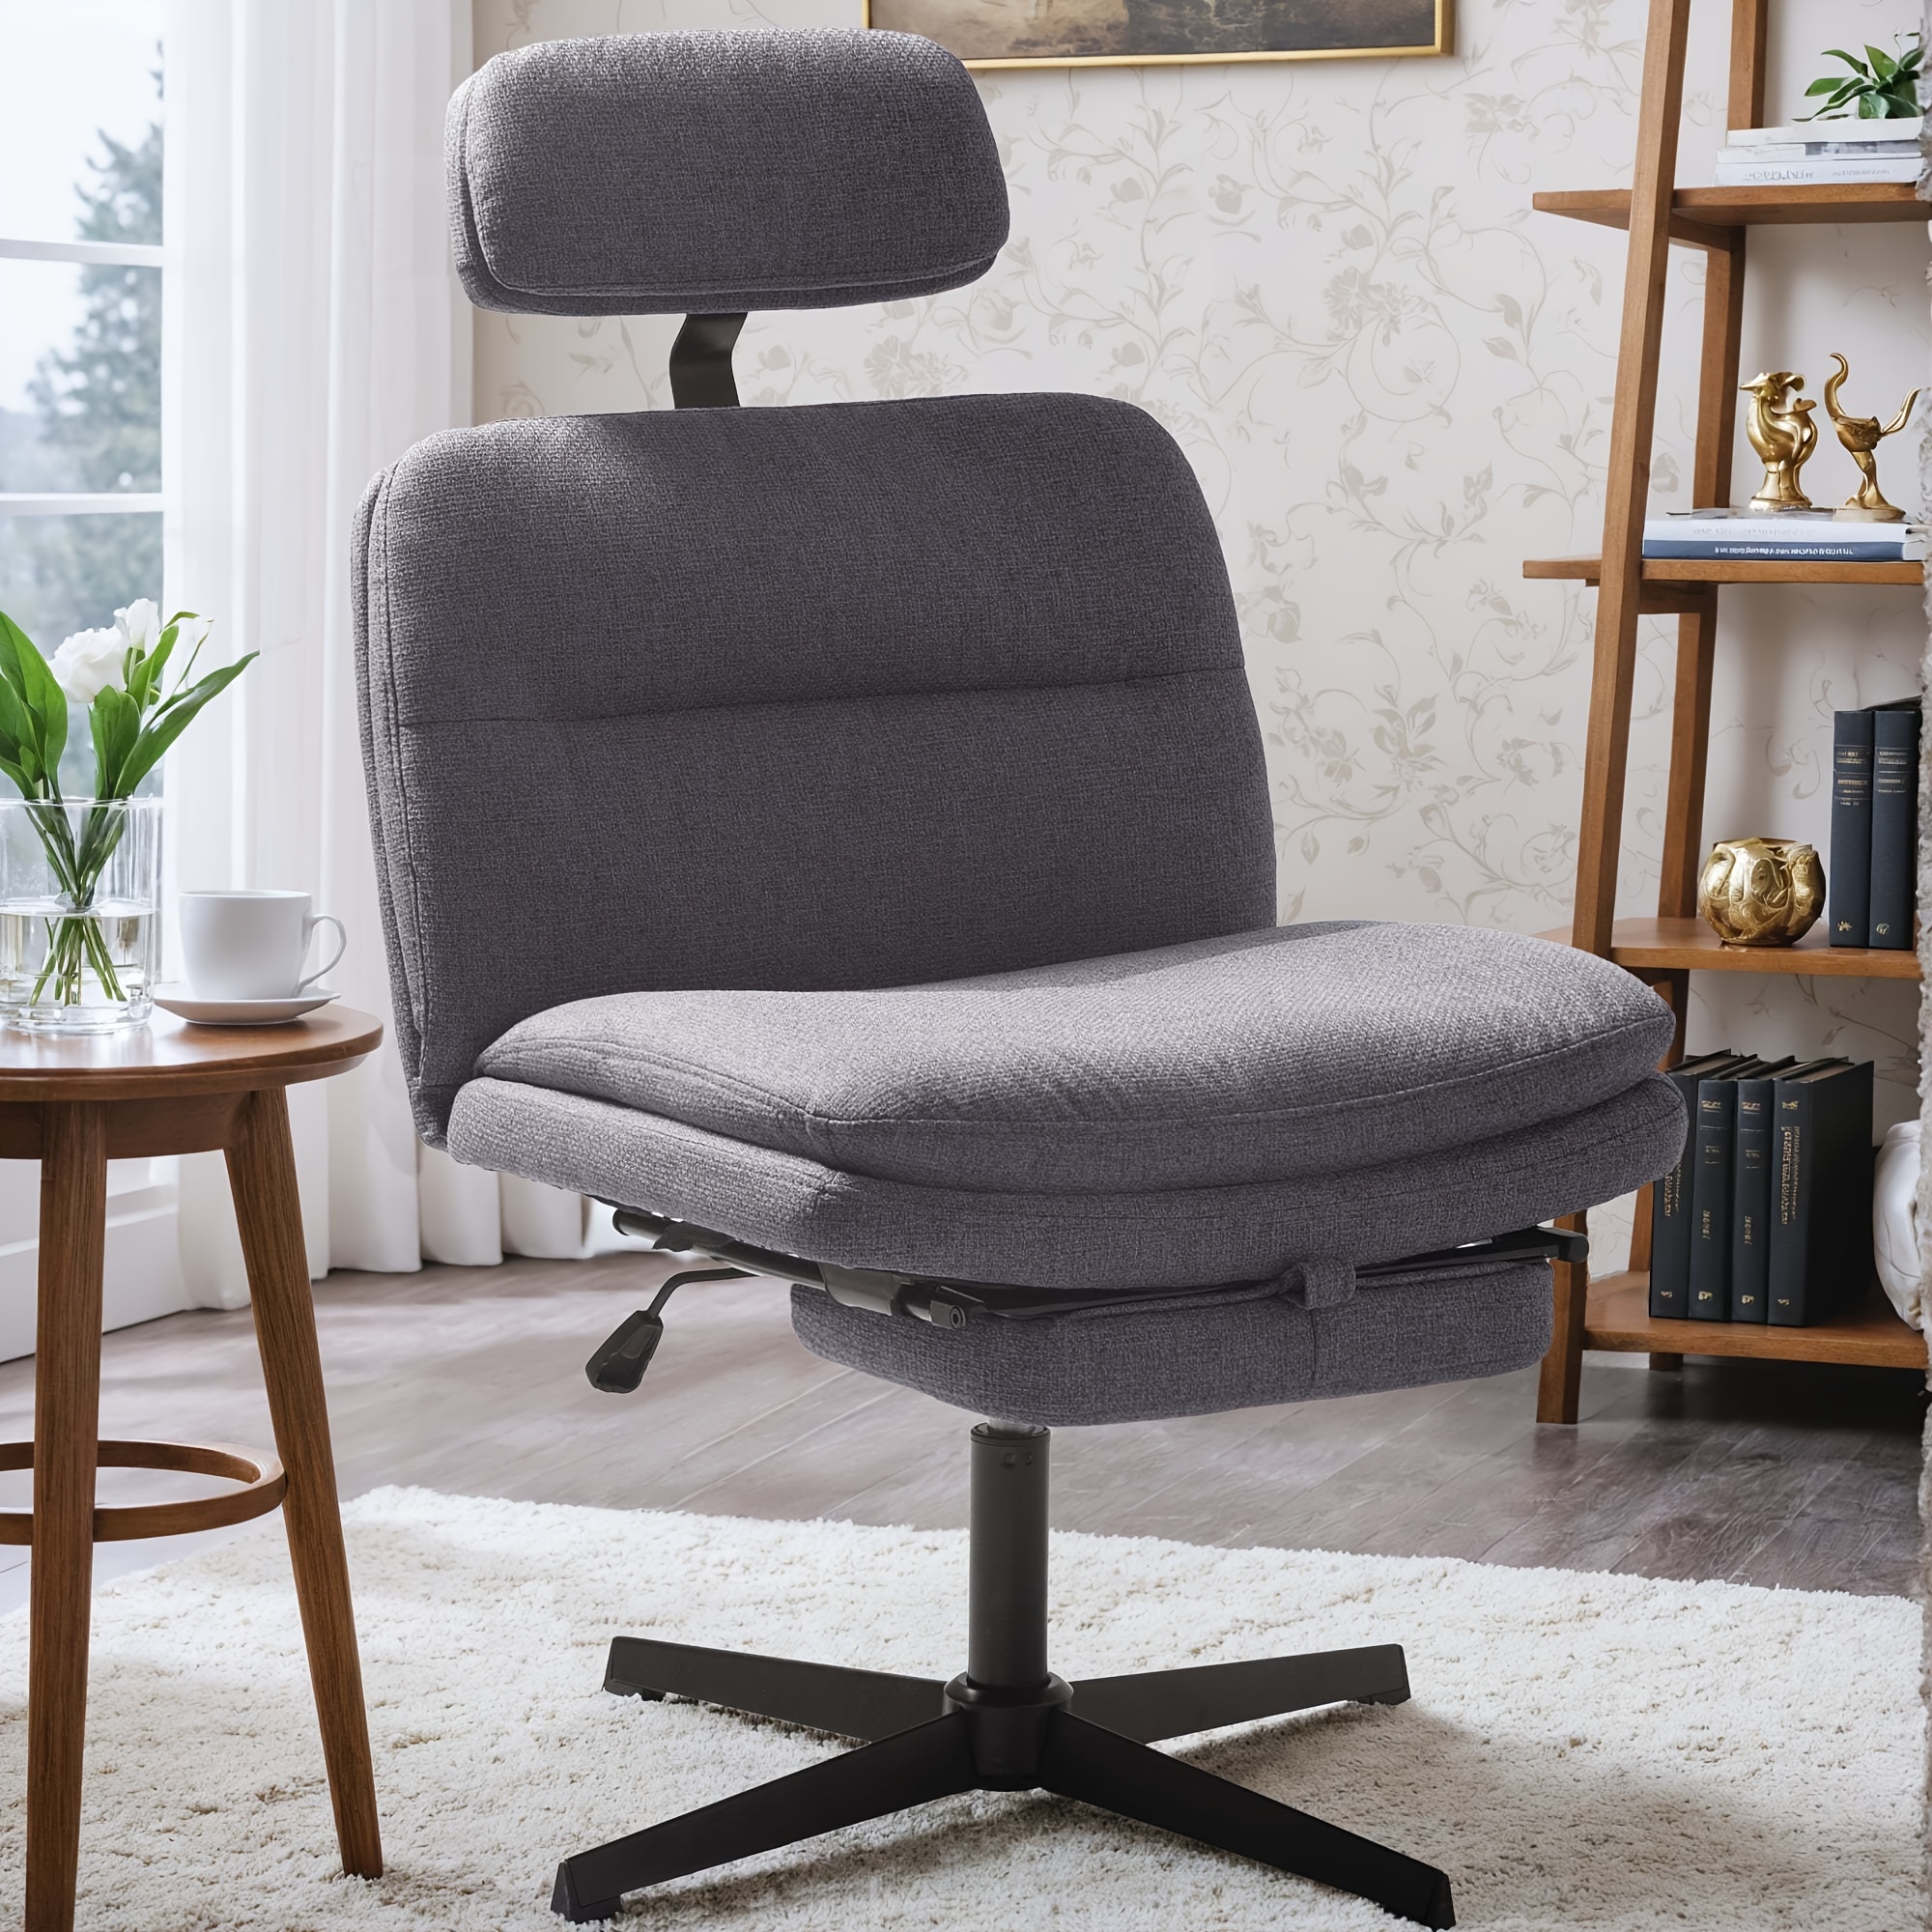 

1pc Ergonomic Swivel Office Task Chair With Footrest, High Back Support, Durable Metal Frame, Adjustable Height, 320 Lbs Capacity, Grey Fabric